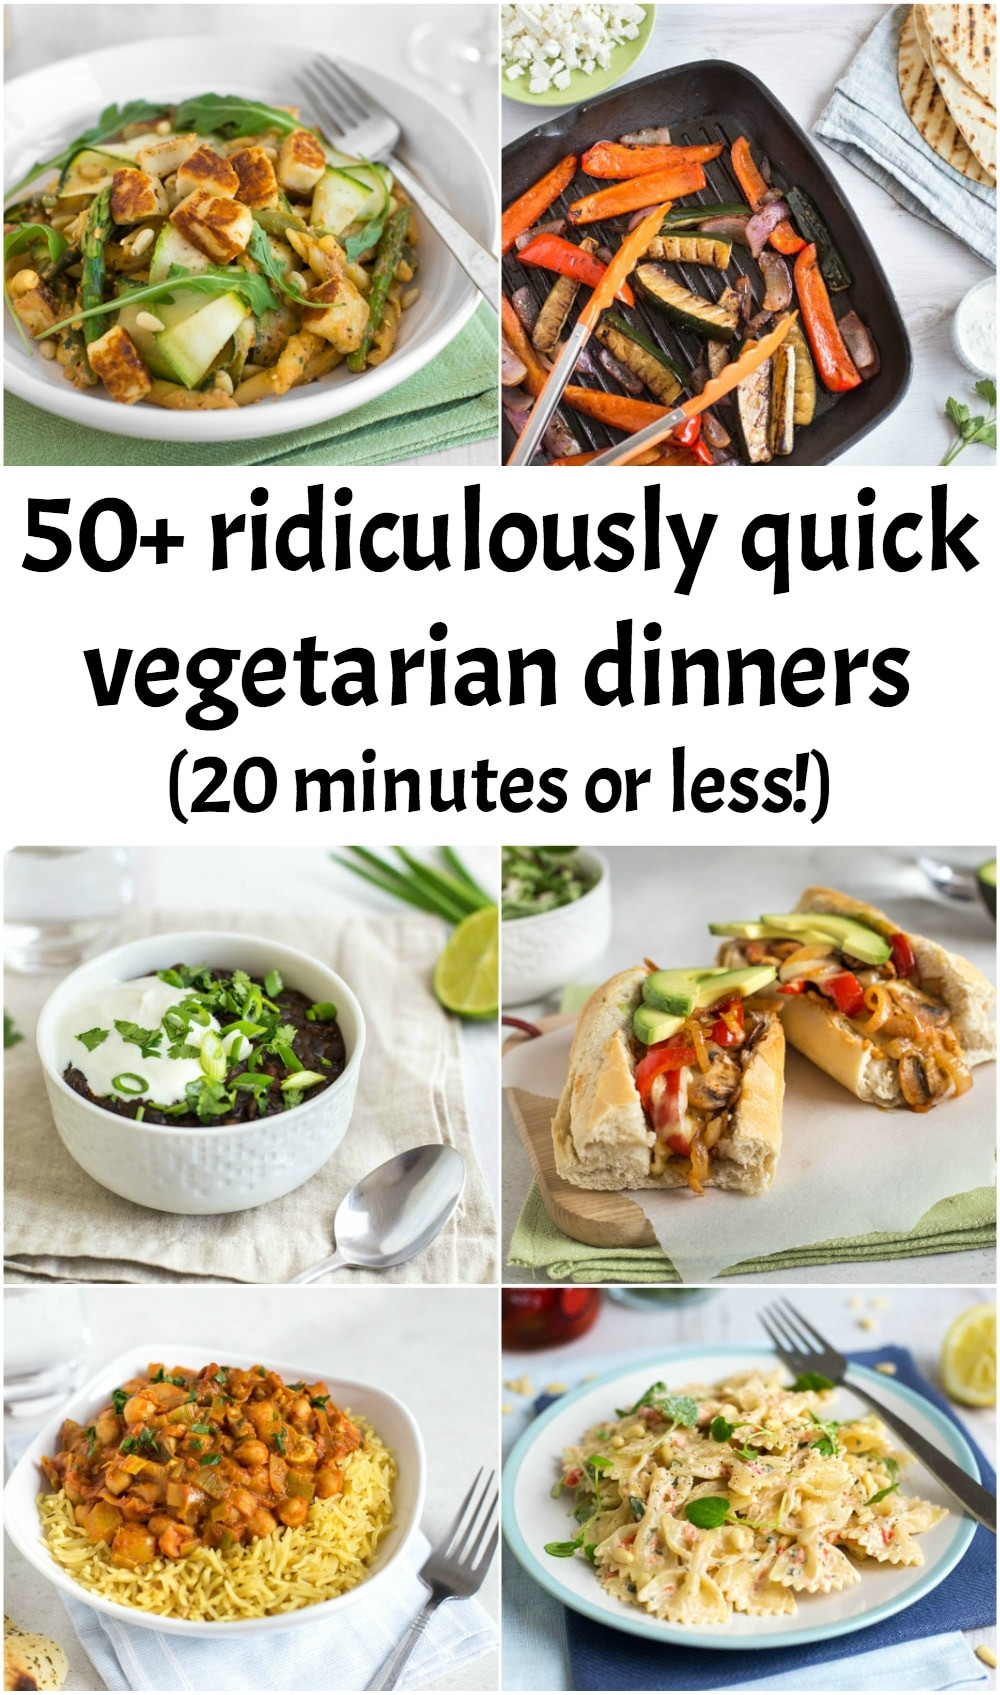 Quick Vegetarian Dinner Recipes
 50 ridiculously quick ve arian dinners 20 minutes or